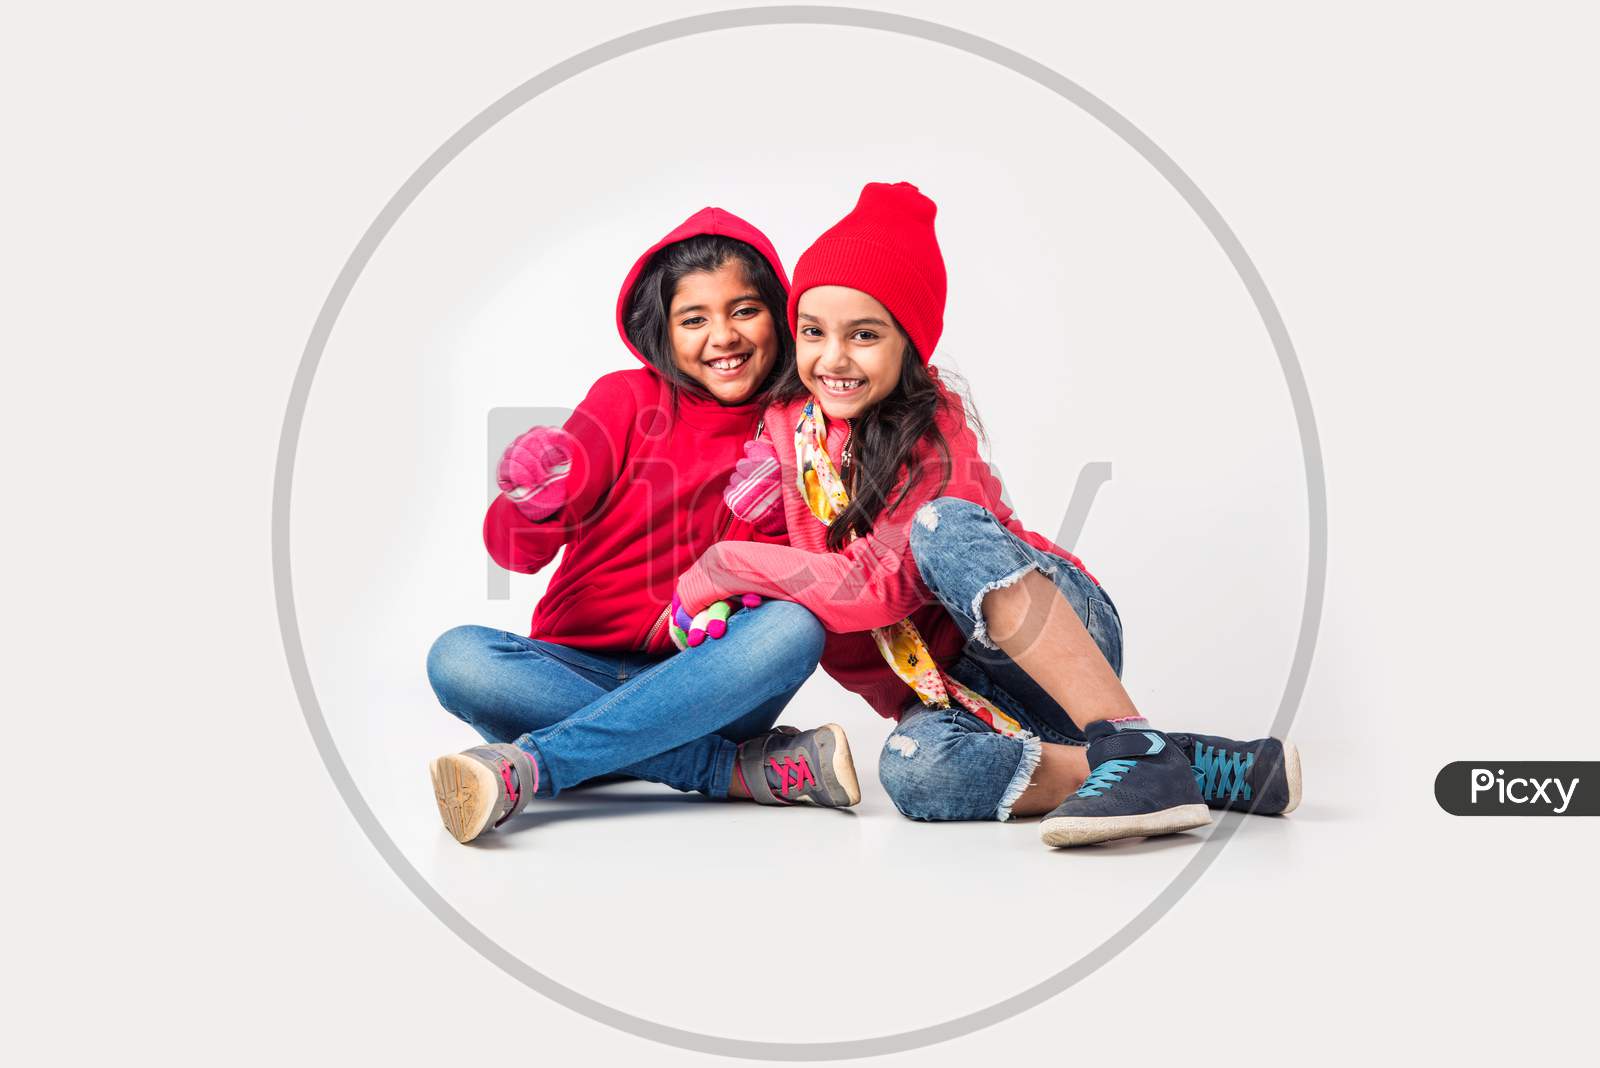 Two Indian little girls in warm cloths sitting and playing against white background